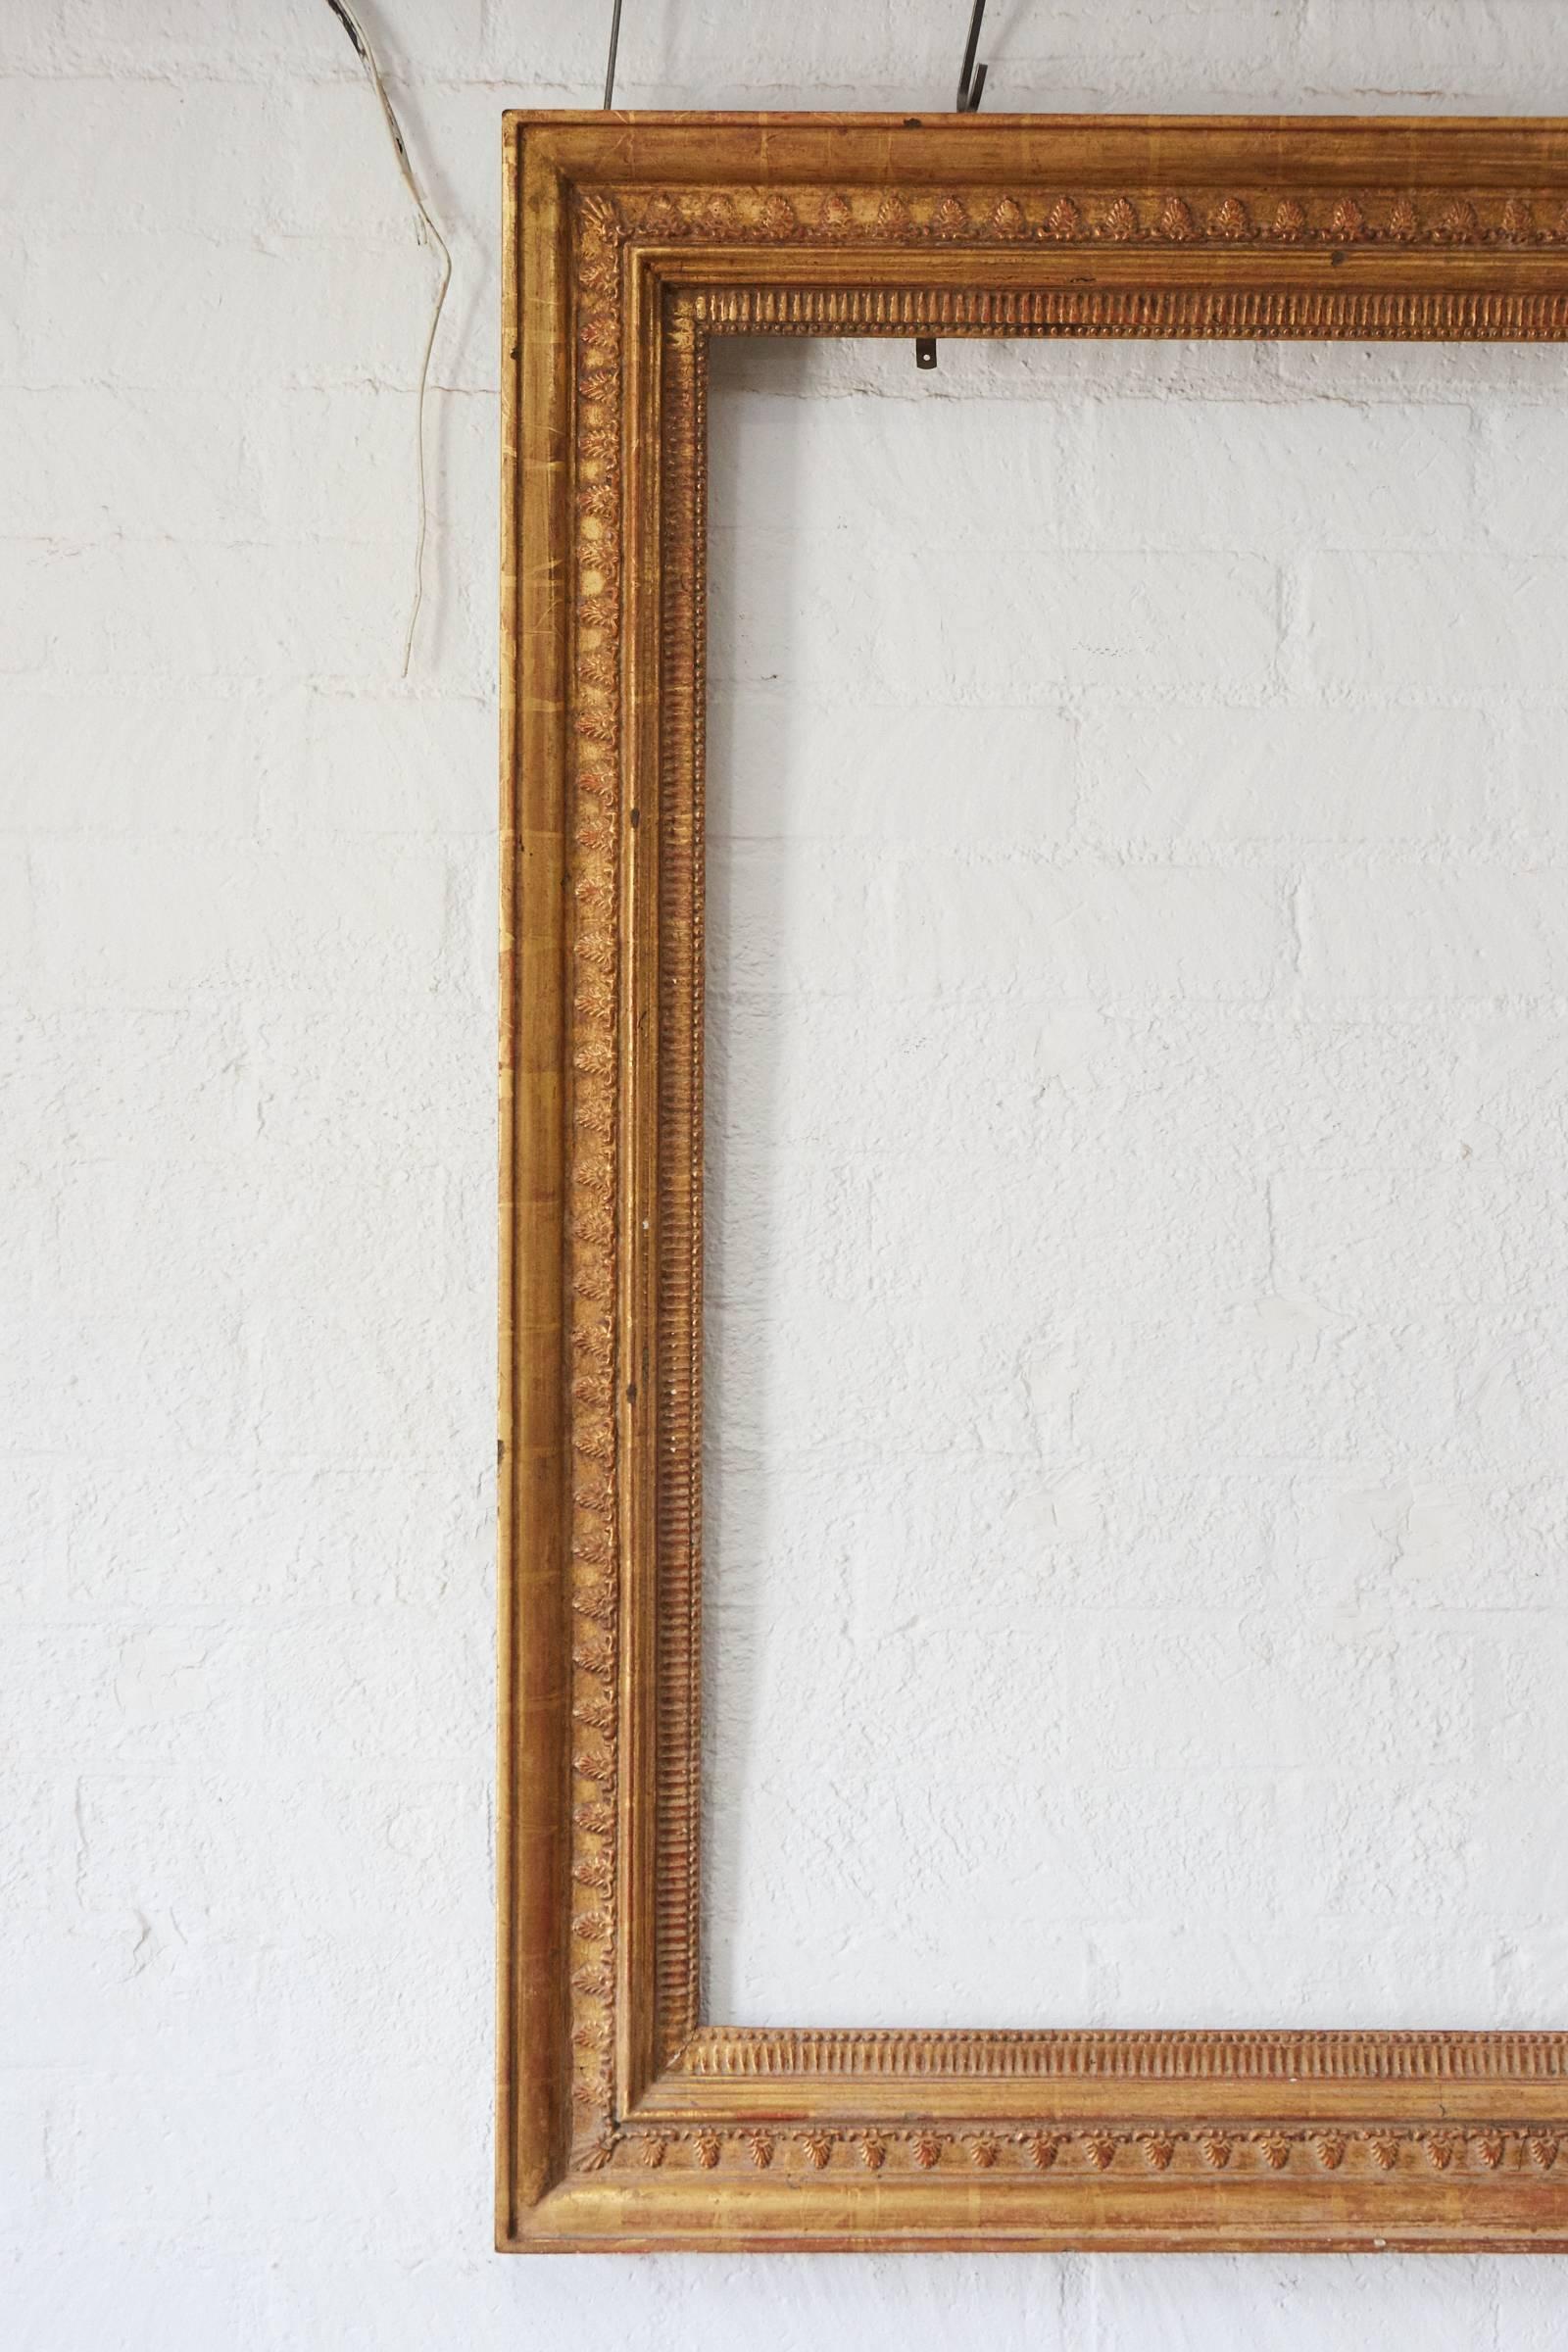 This wonderful large wooden frame has detailed applied plaster patterns that have been gilt with gold leaf. We believe that this frame is European and from the 19th century or later. The piece most likely held a painting and could be used today to